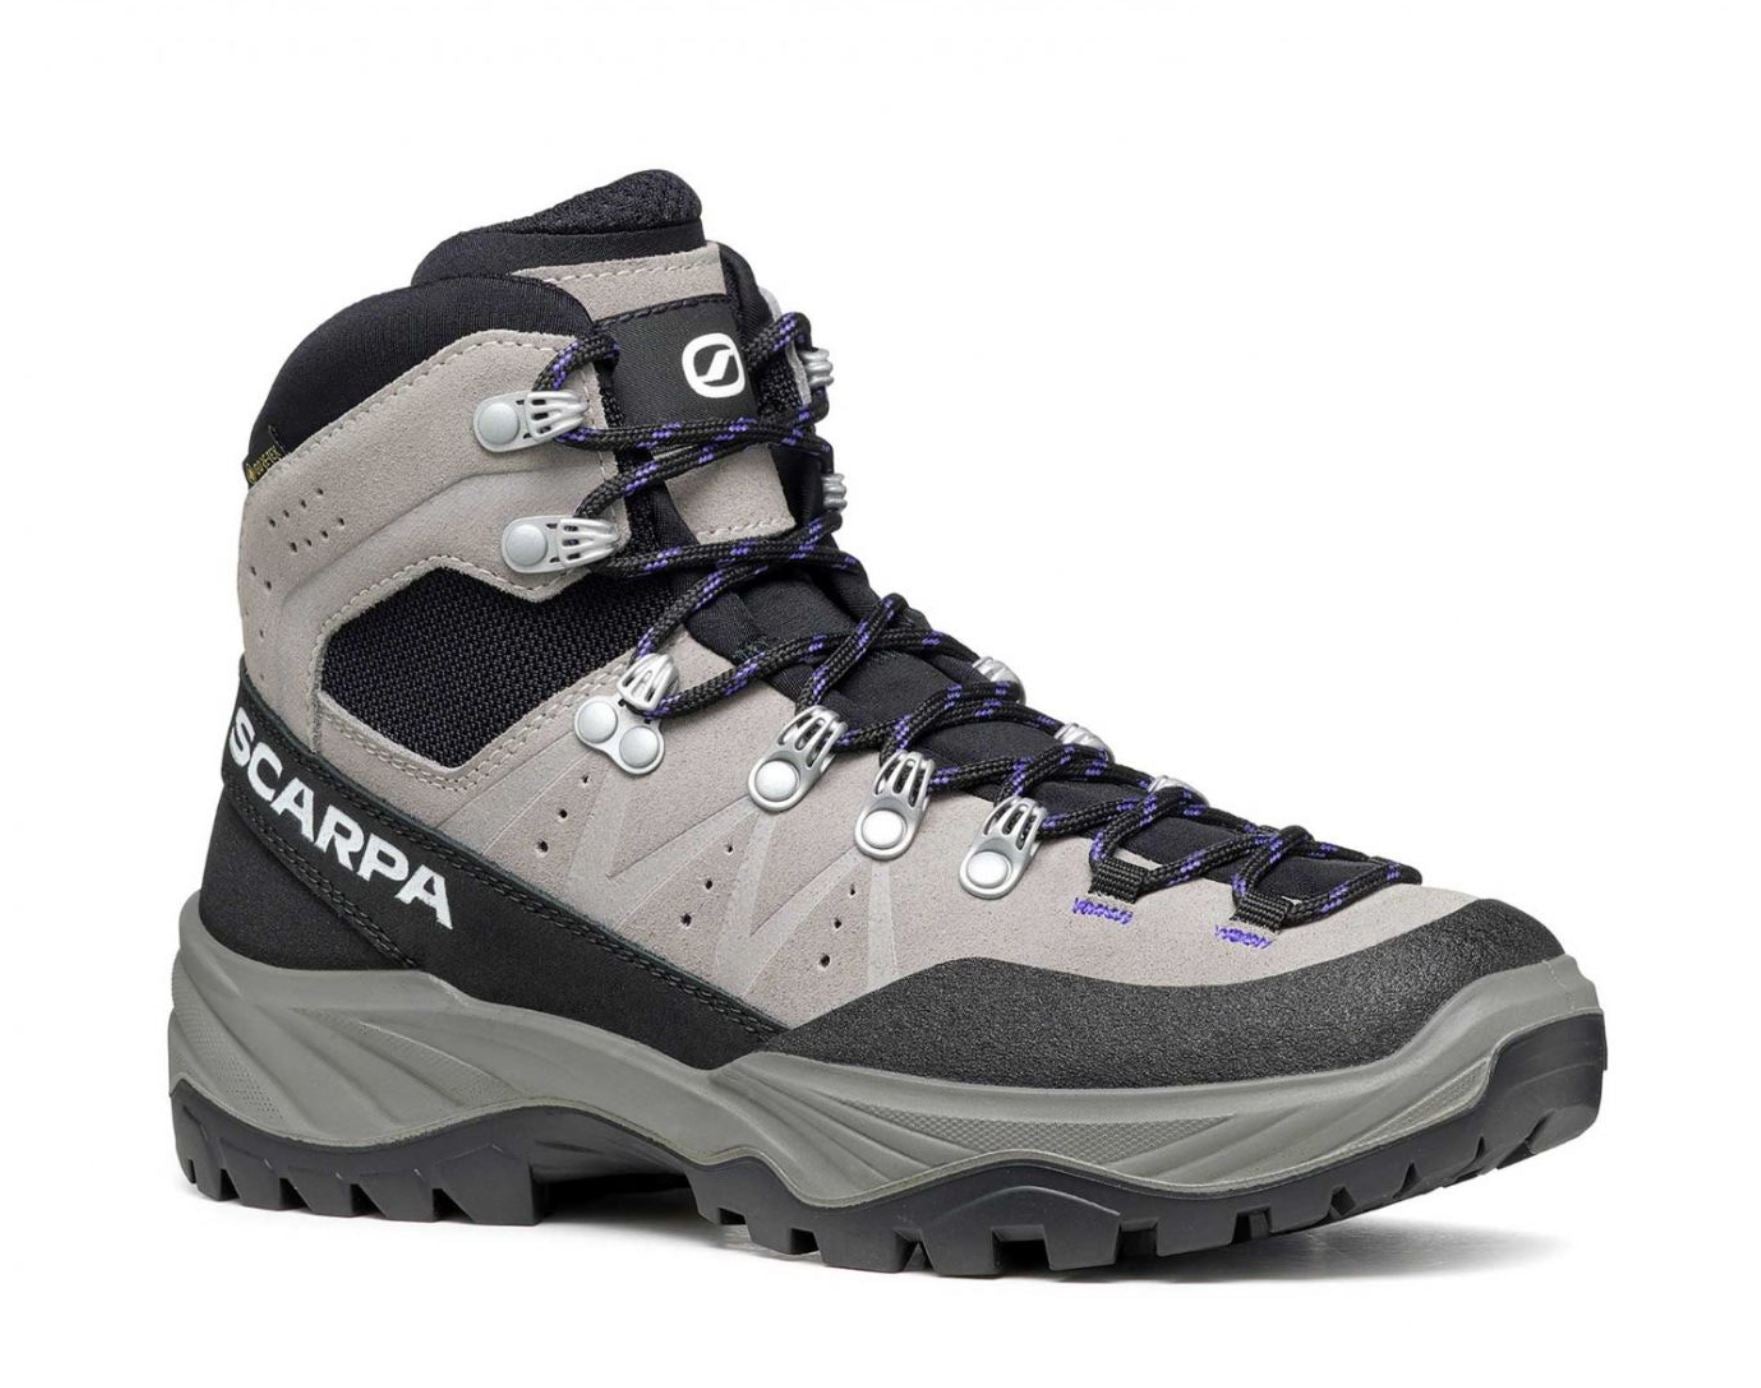 3/4 view of the scarpa womens boreas gtx boot